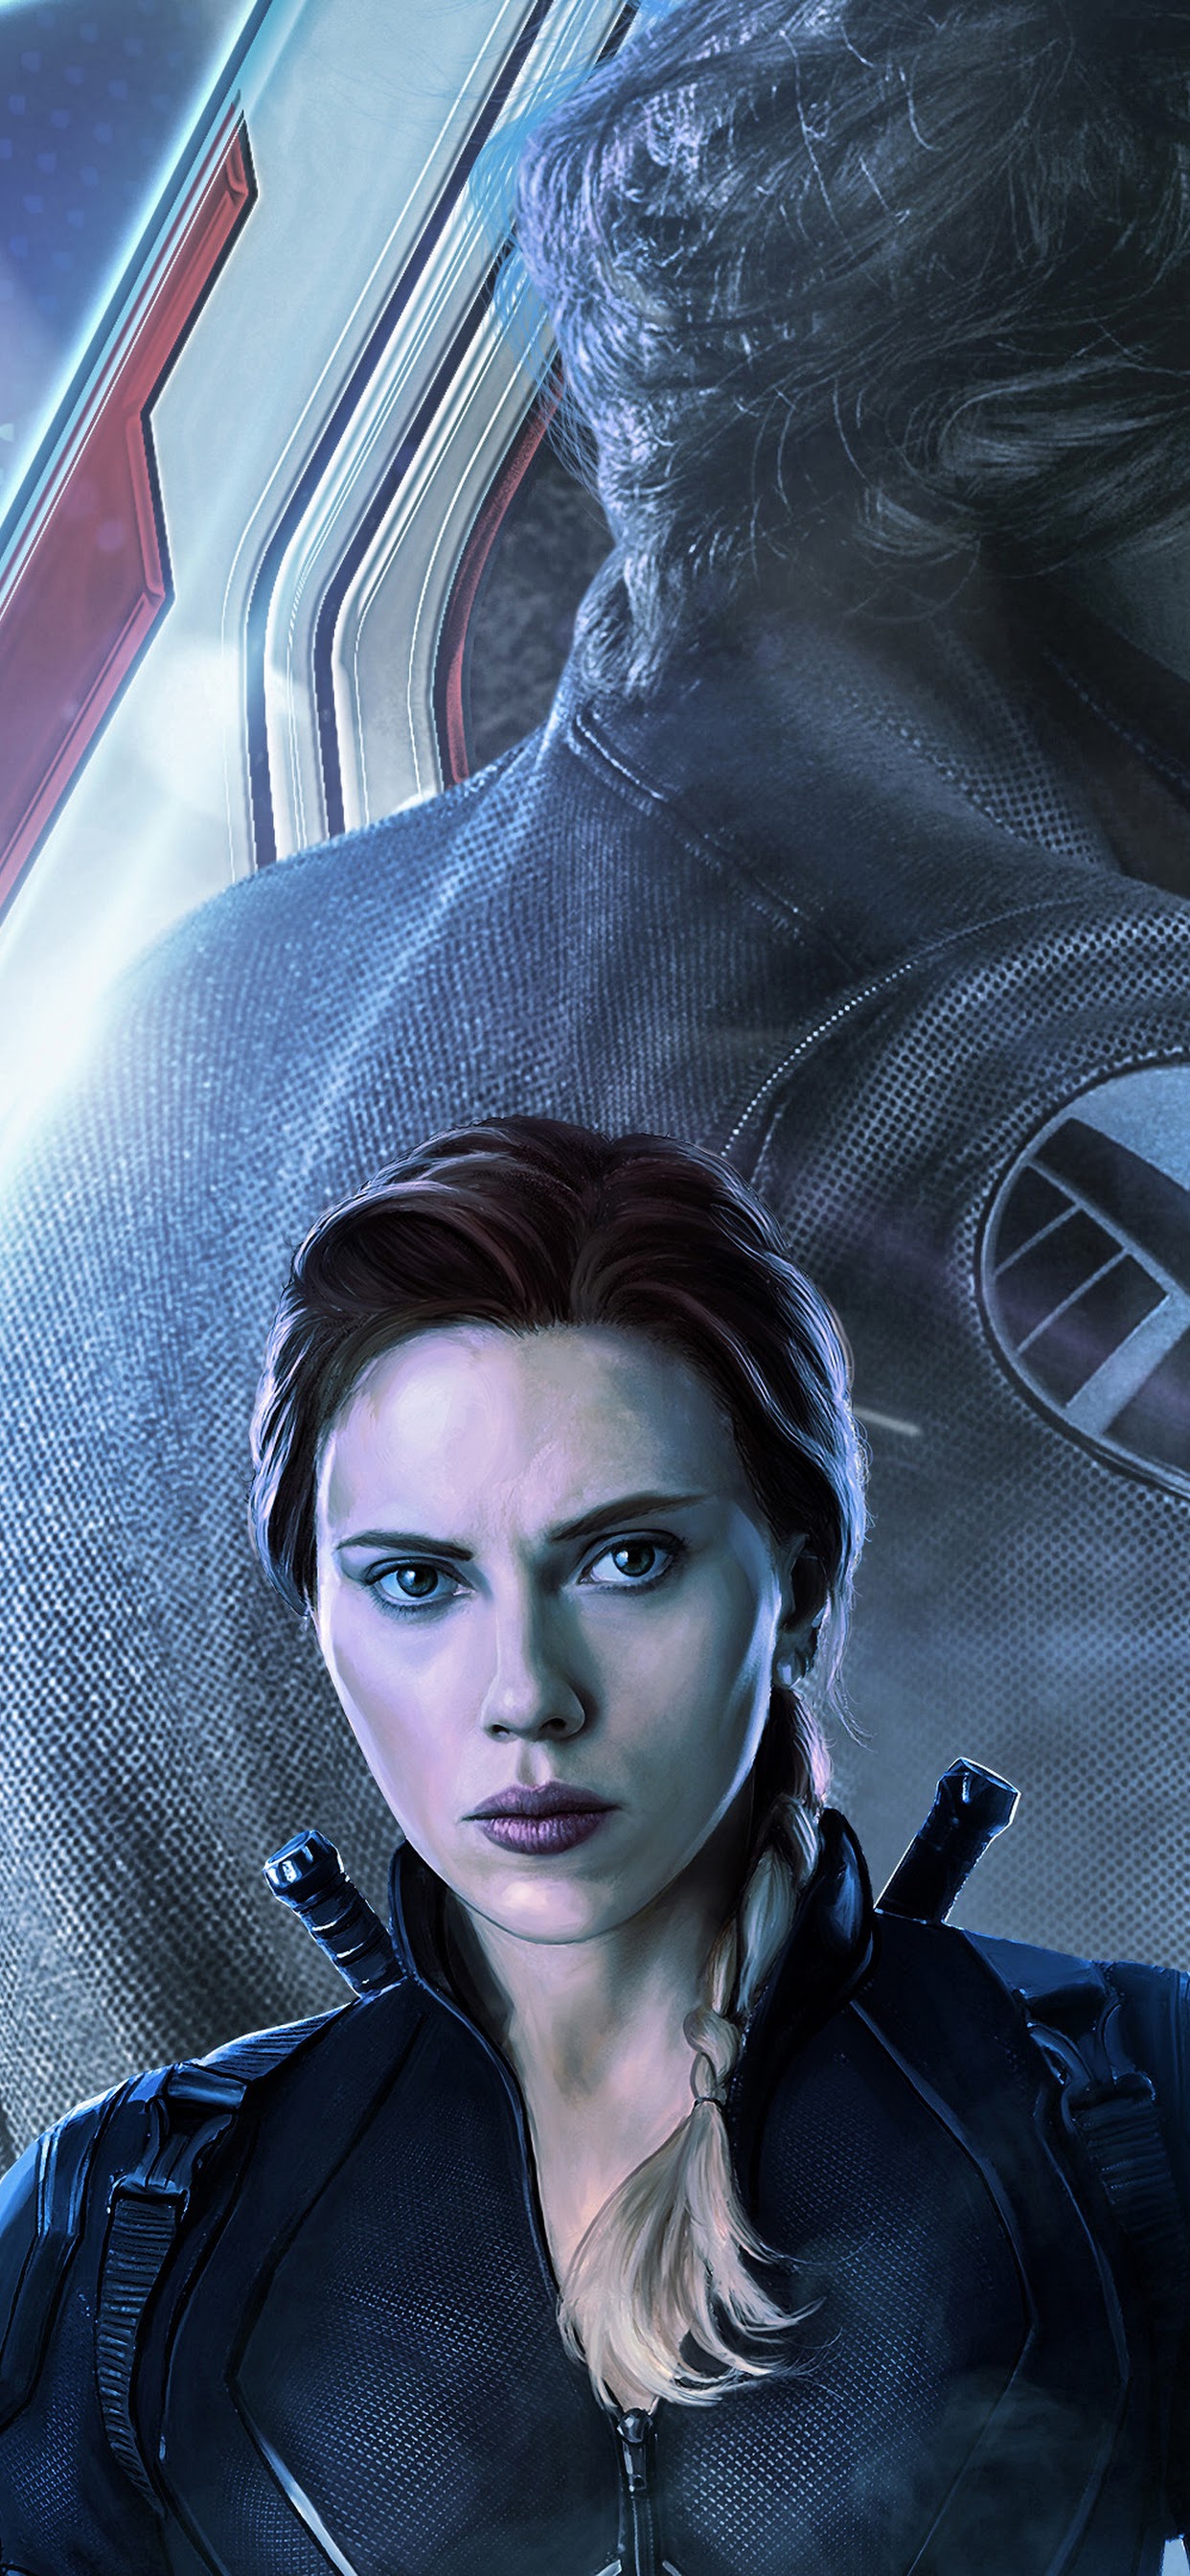 Black Widow Movie Poster Character 4K Phone iPhone Wallpaper 7191a